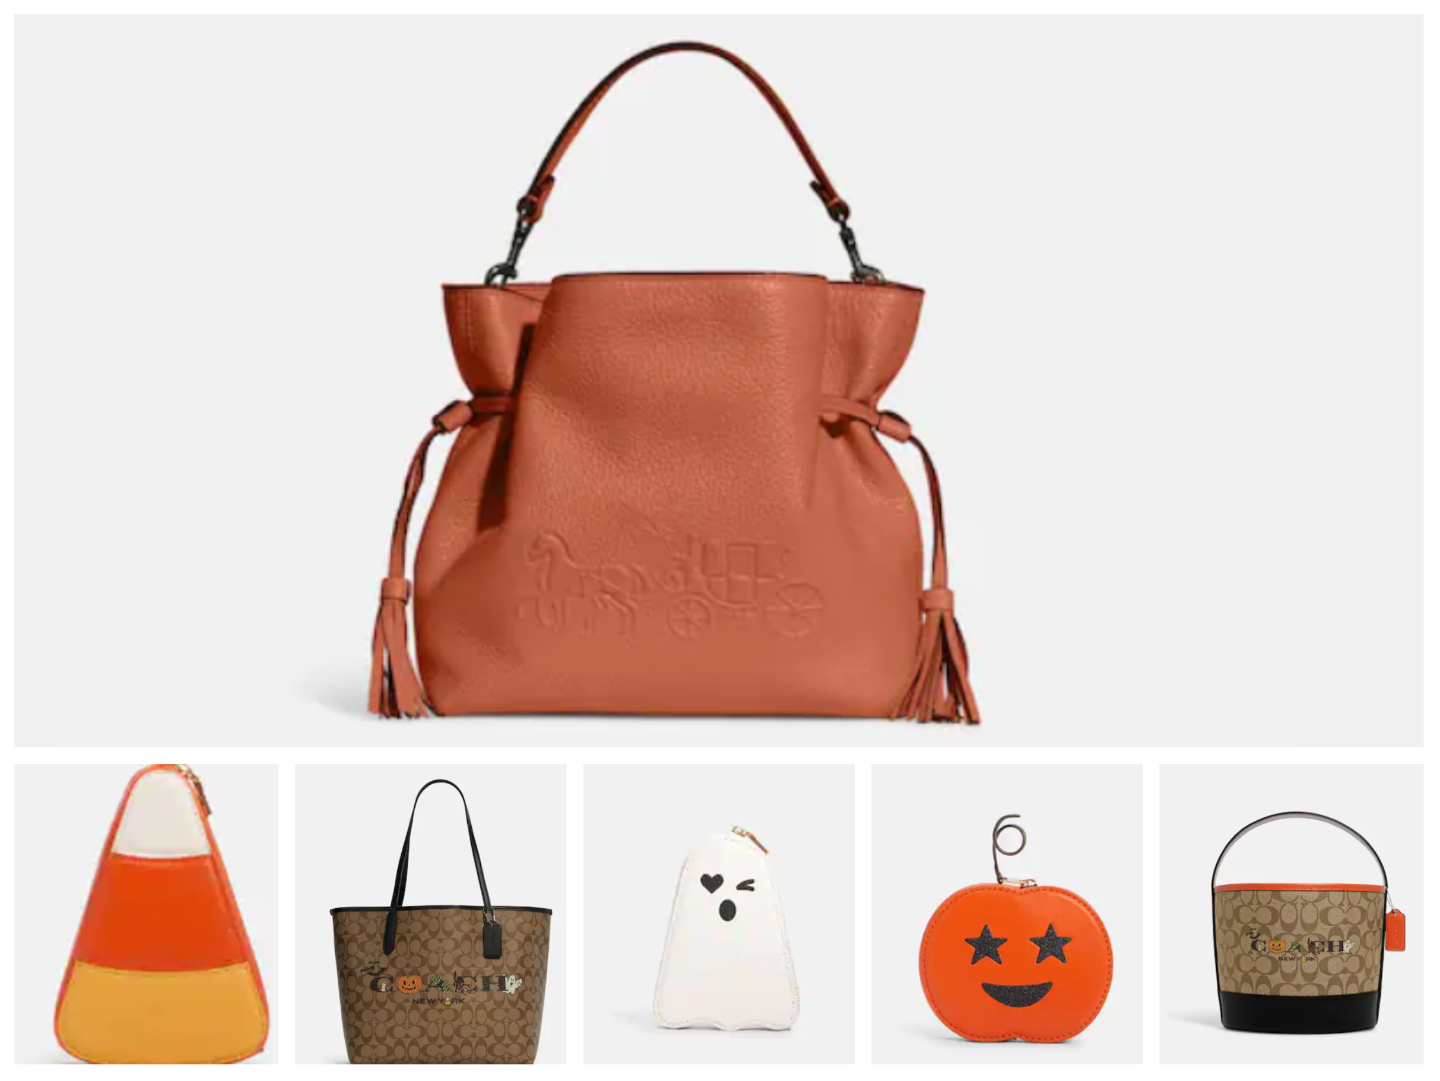 Coach Outlet Bags 70% Off + Extra 20% Off + FREE Shipping